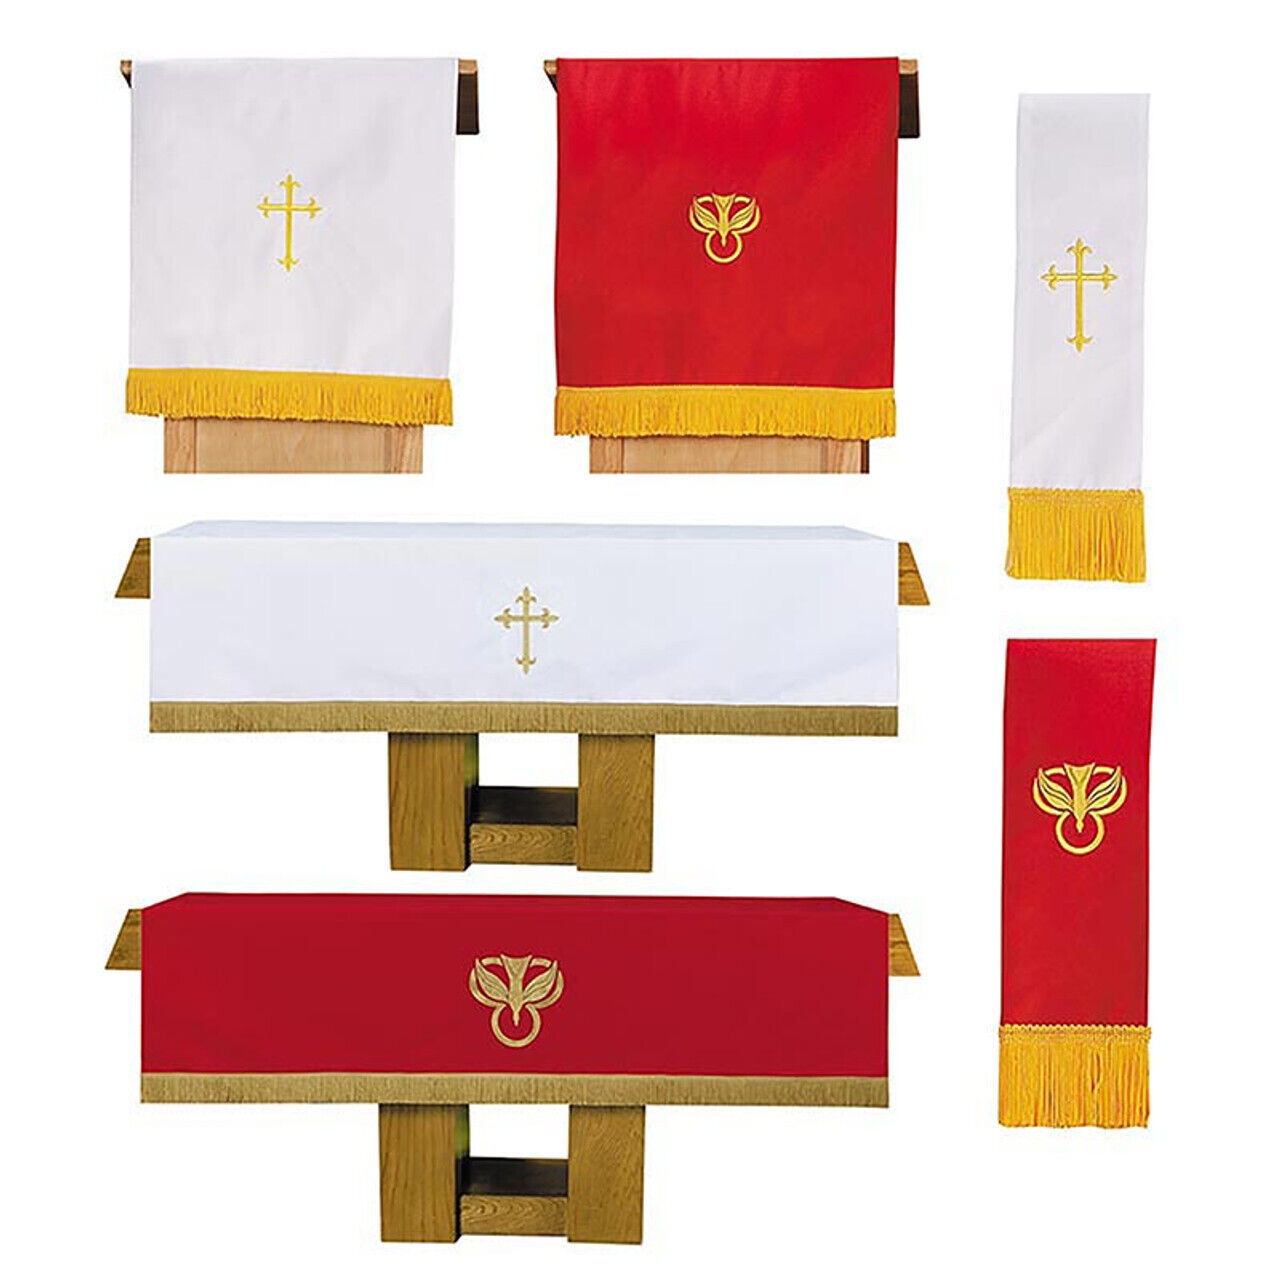 3 Piece Reversible Latin Cross Parament Set Red and White Color Church Supplies